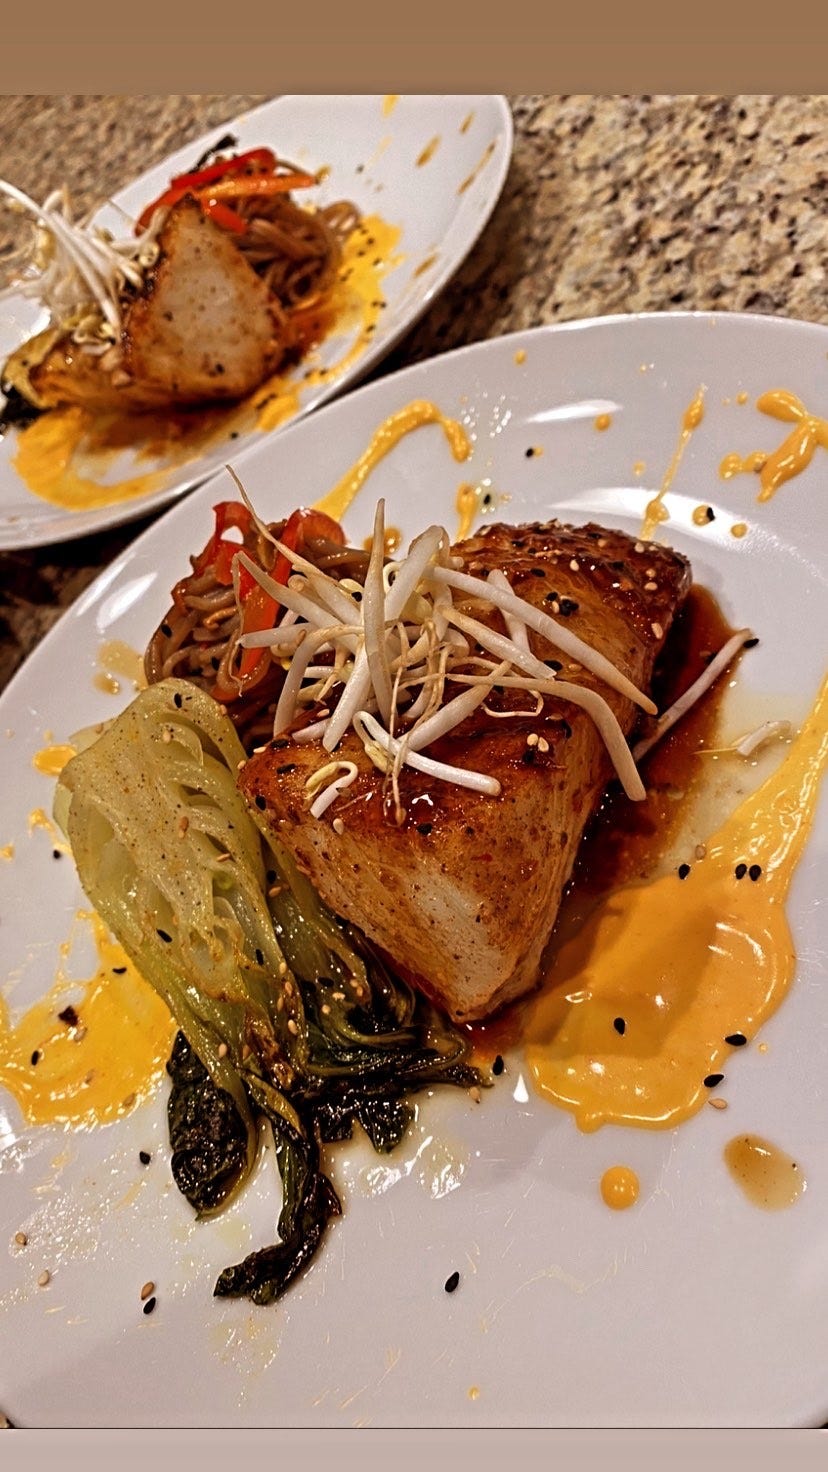 Teriyaki sea bass, brown rice lo mein noodles and grilled baby bok choy over turmeric carrot puree.